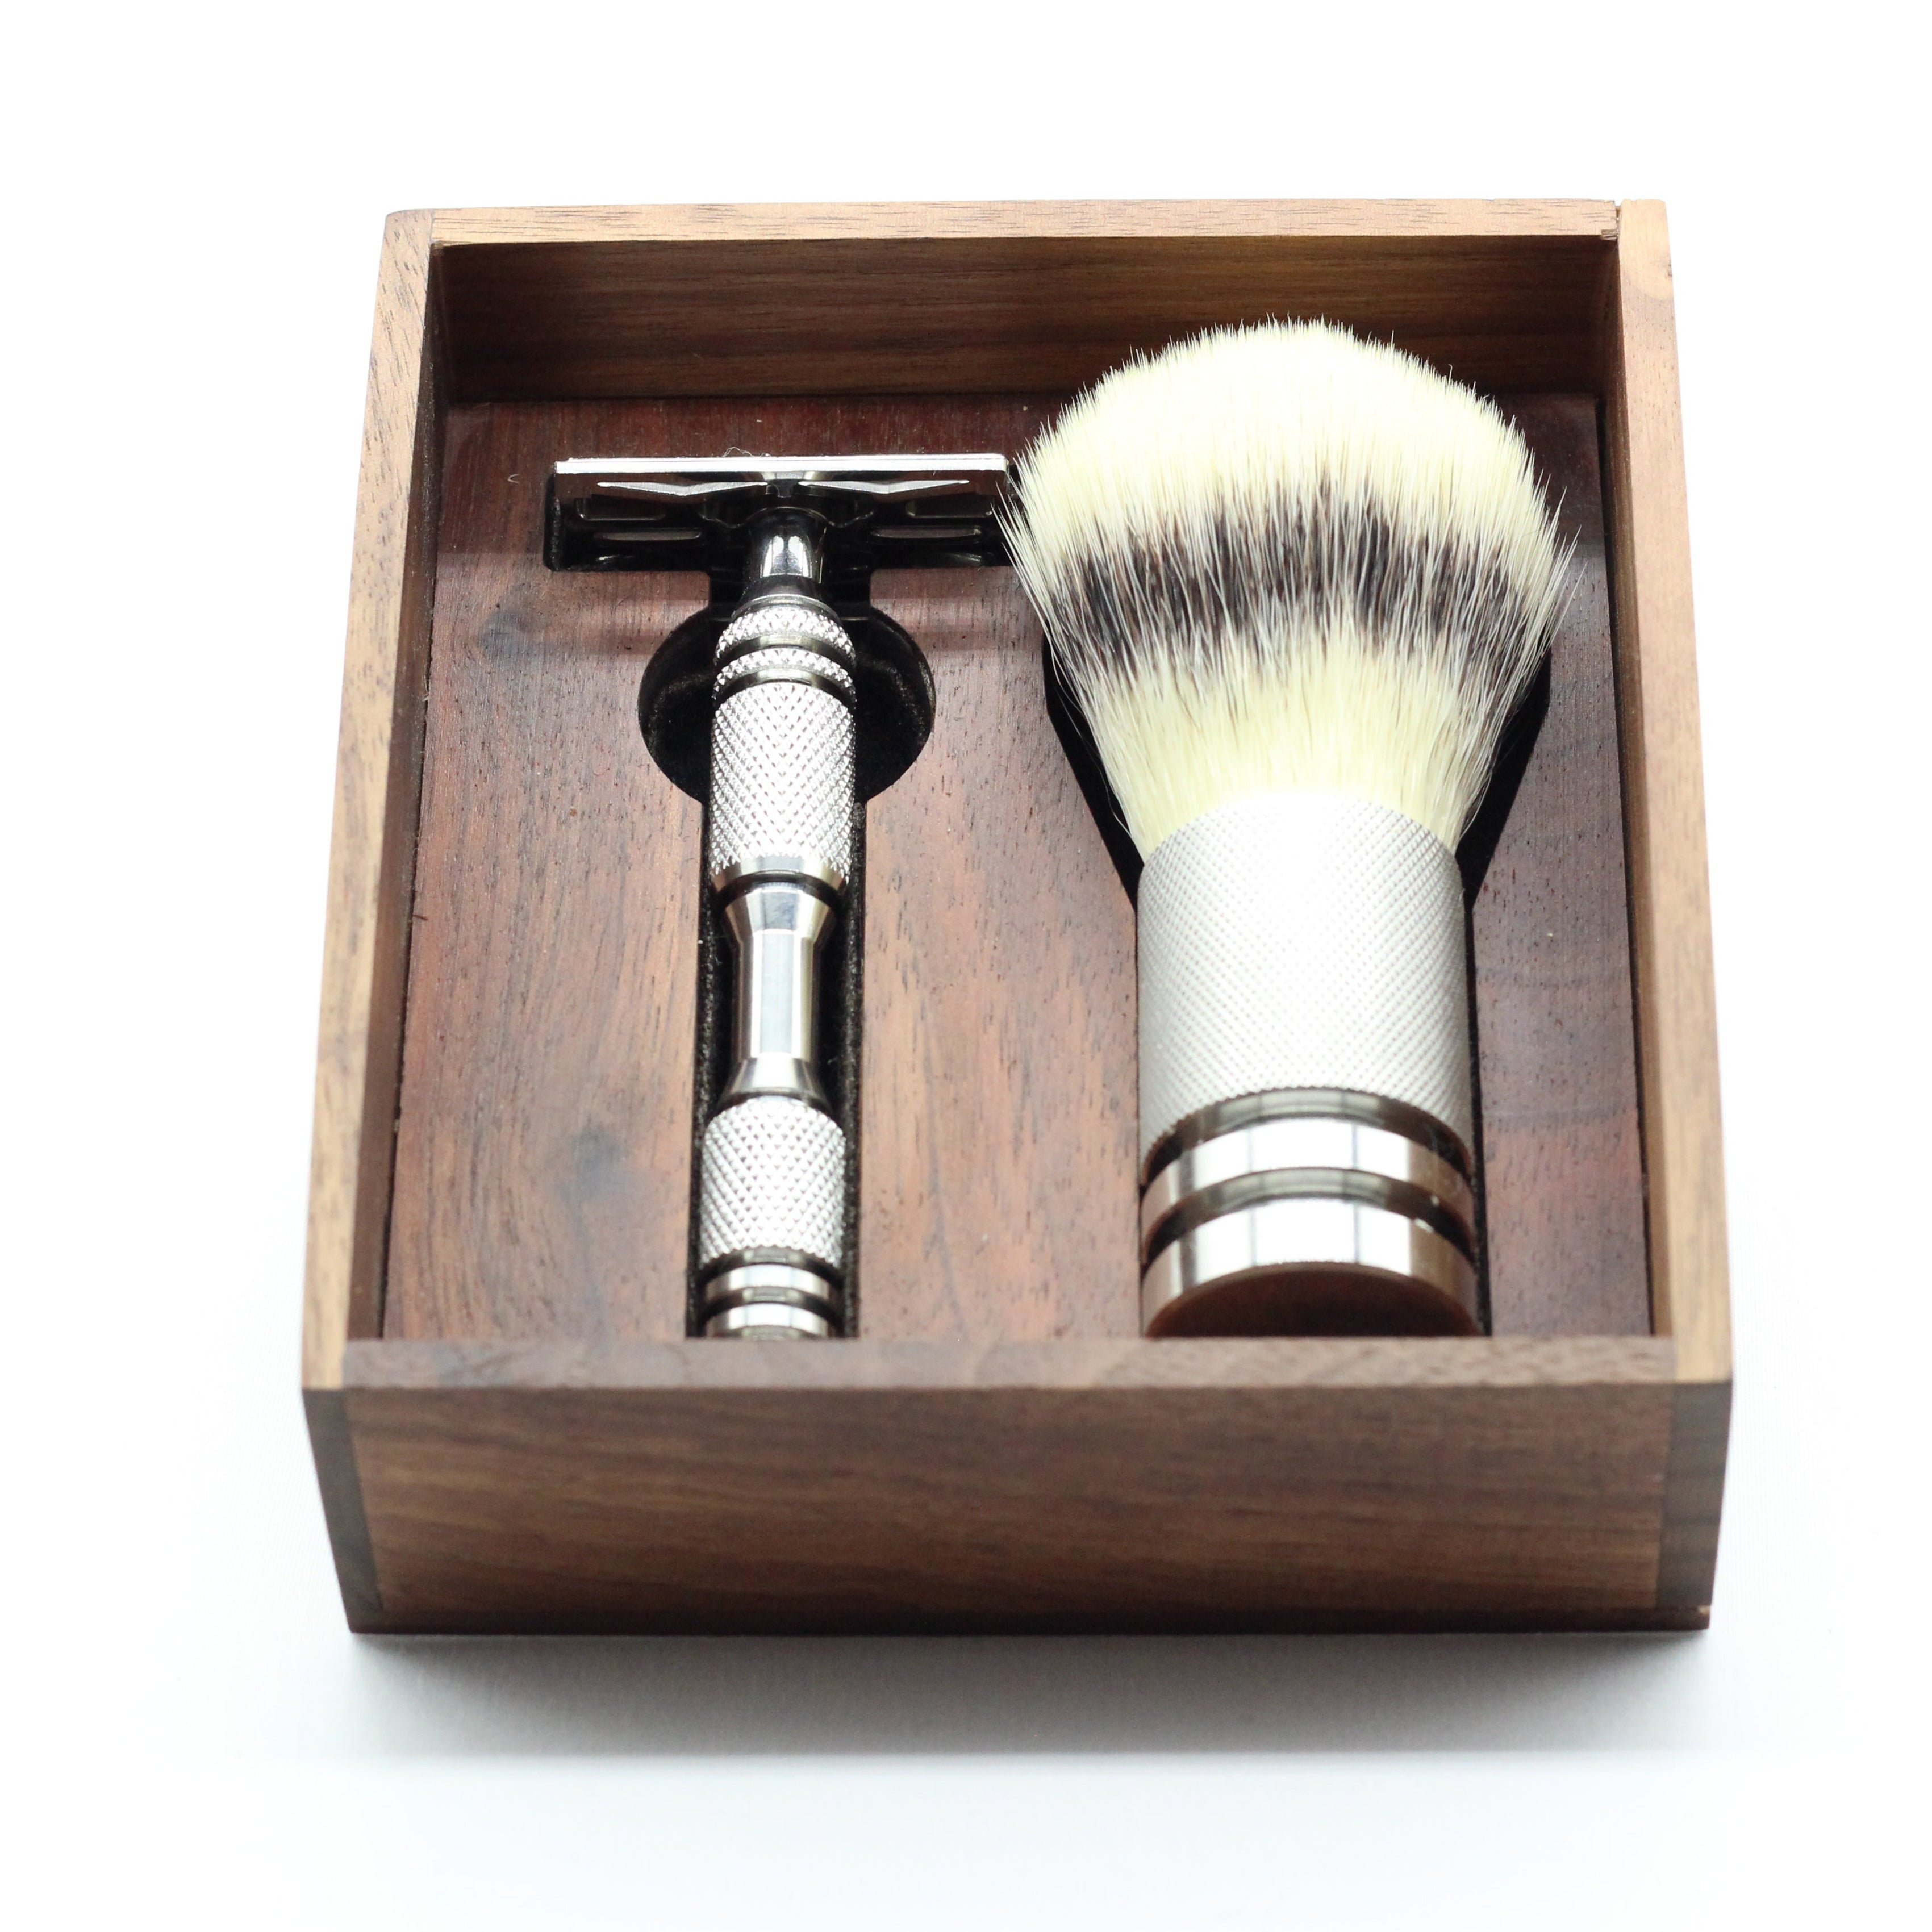 A Safety Razor for a Groom Gift